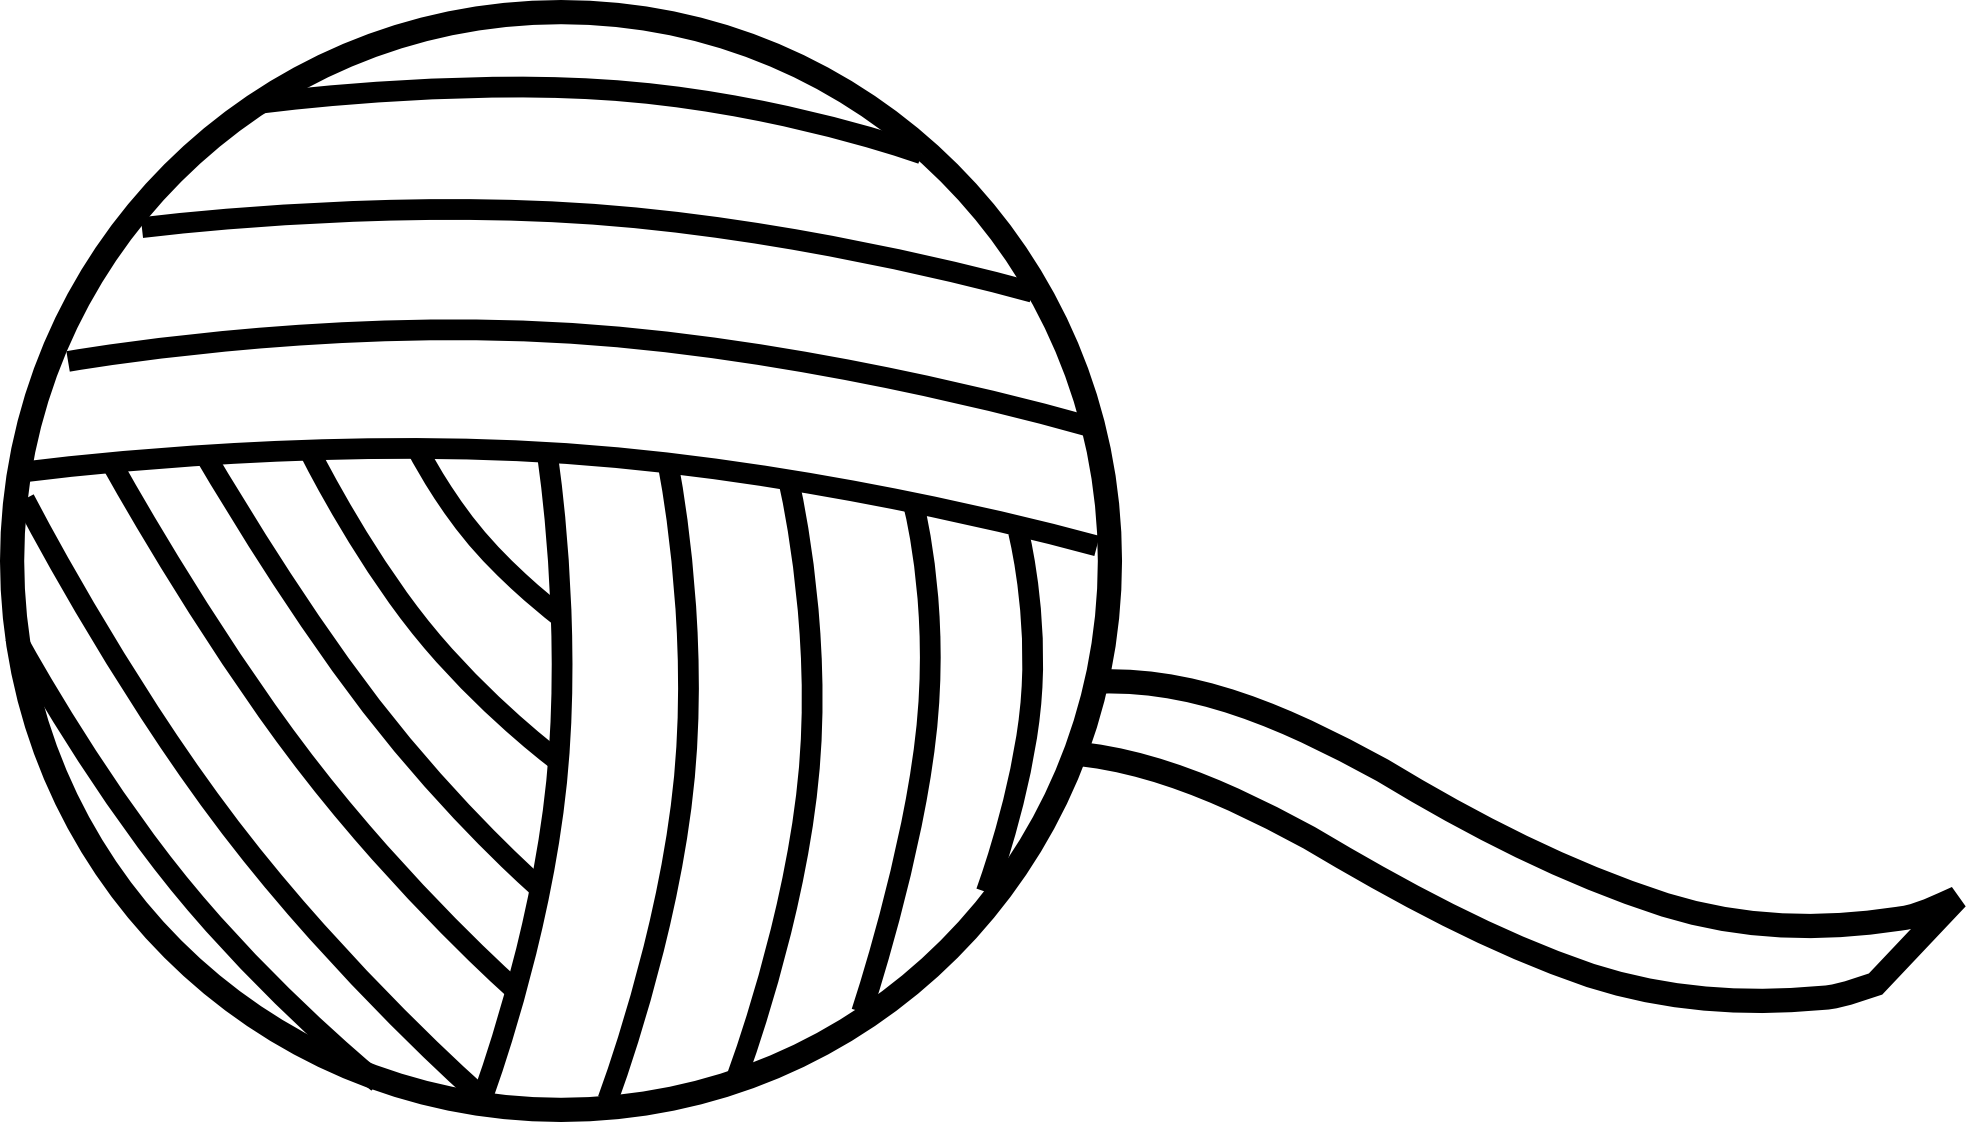 Yarn Clipart Black And White - Yarn Black And White, Transparent background PNG HD thumbnail